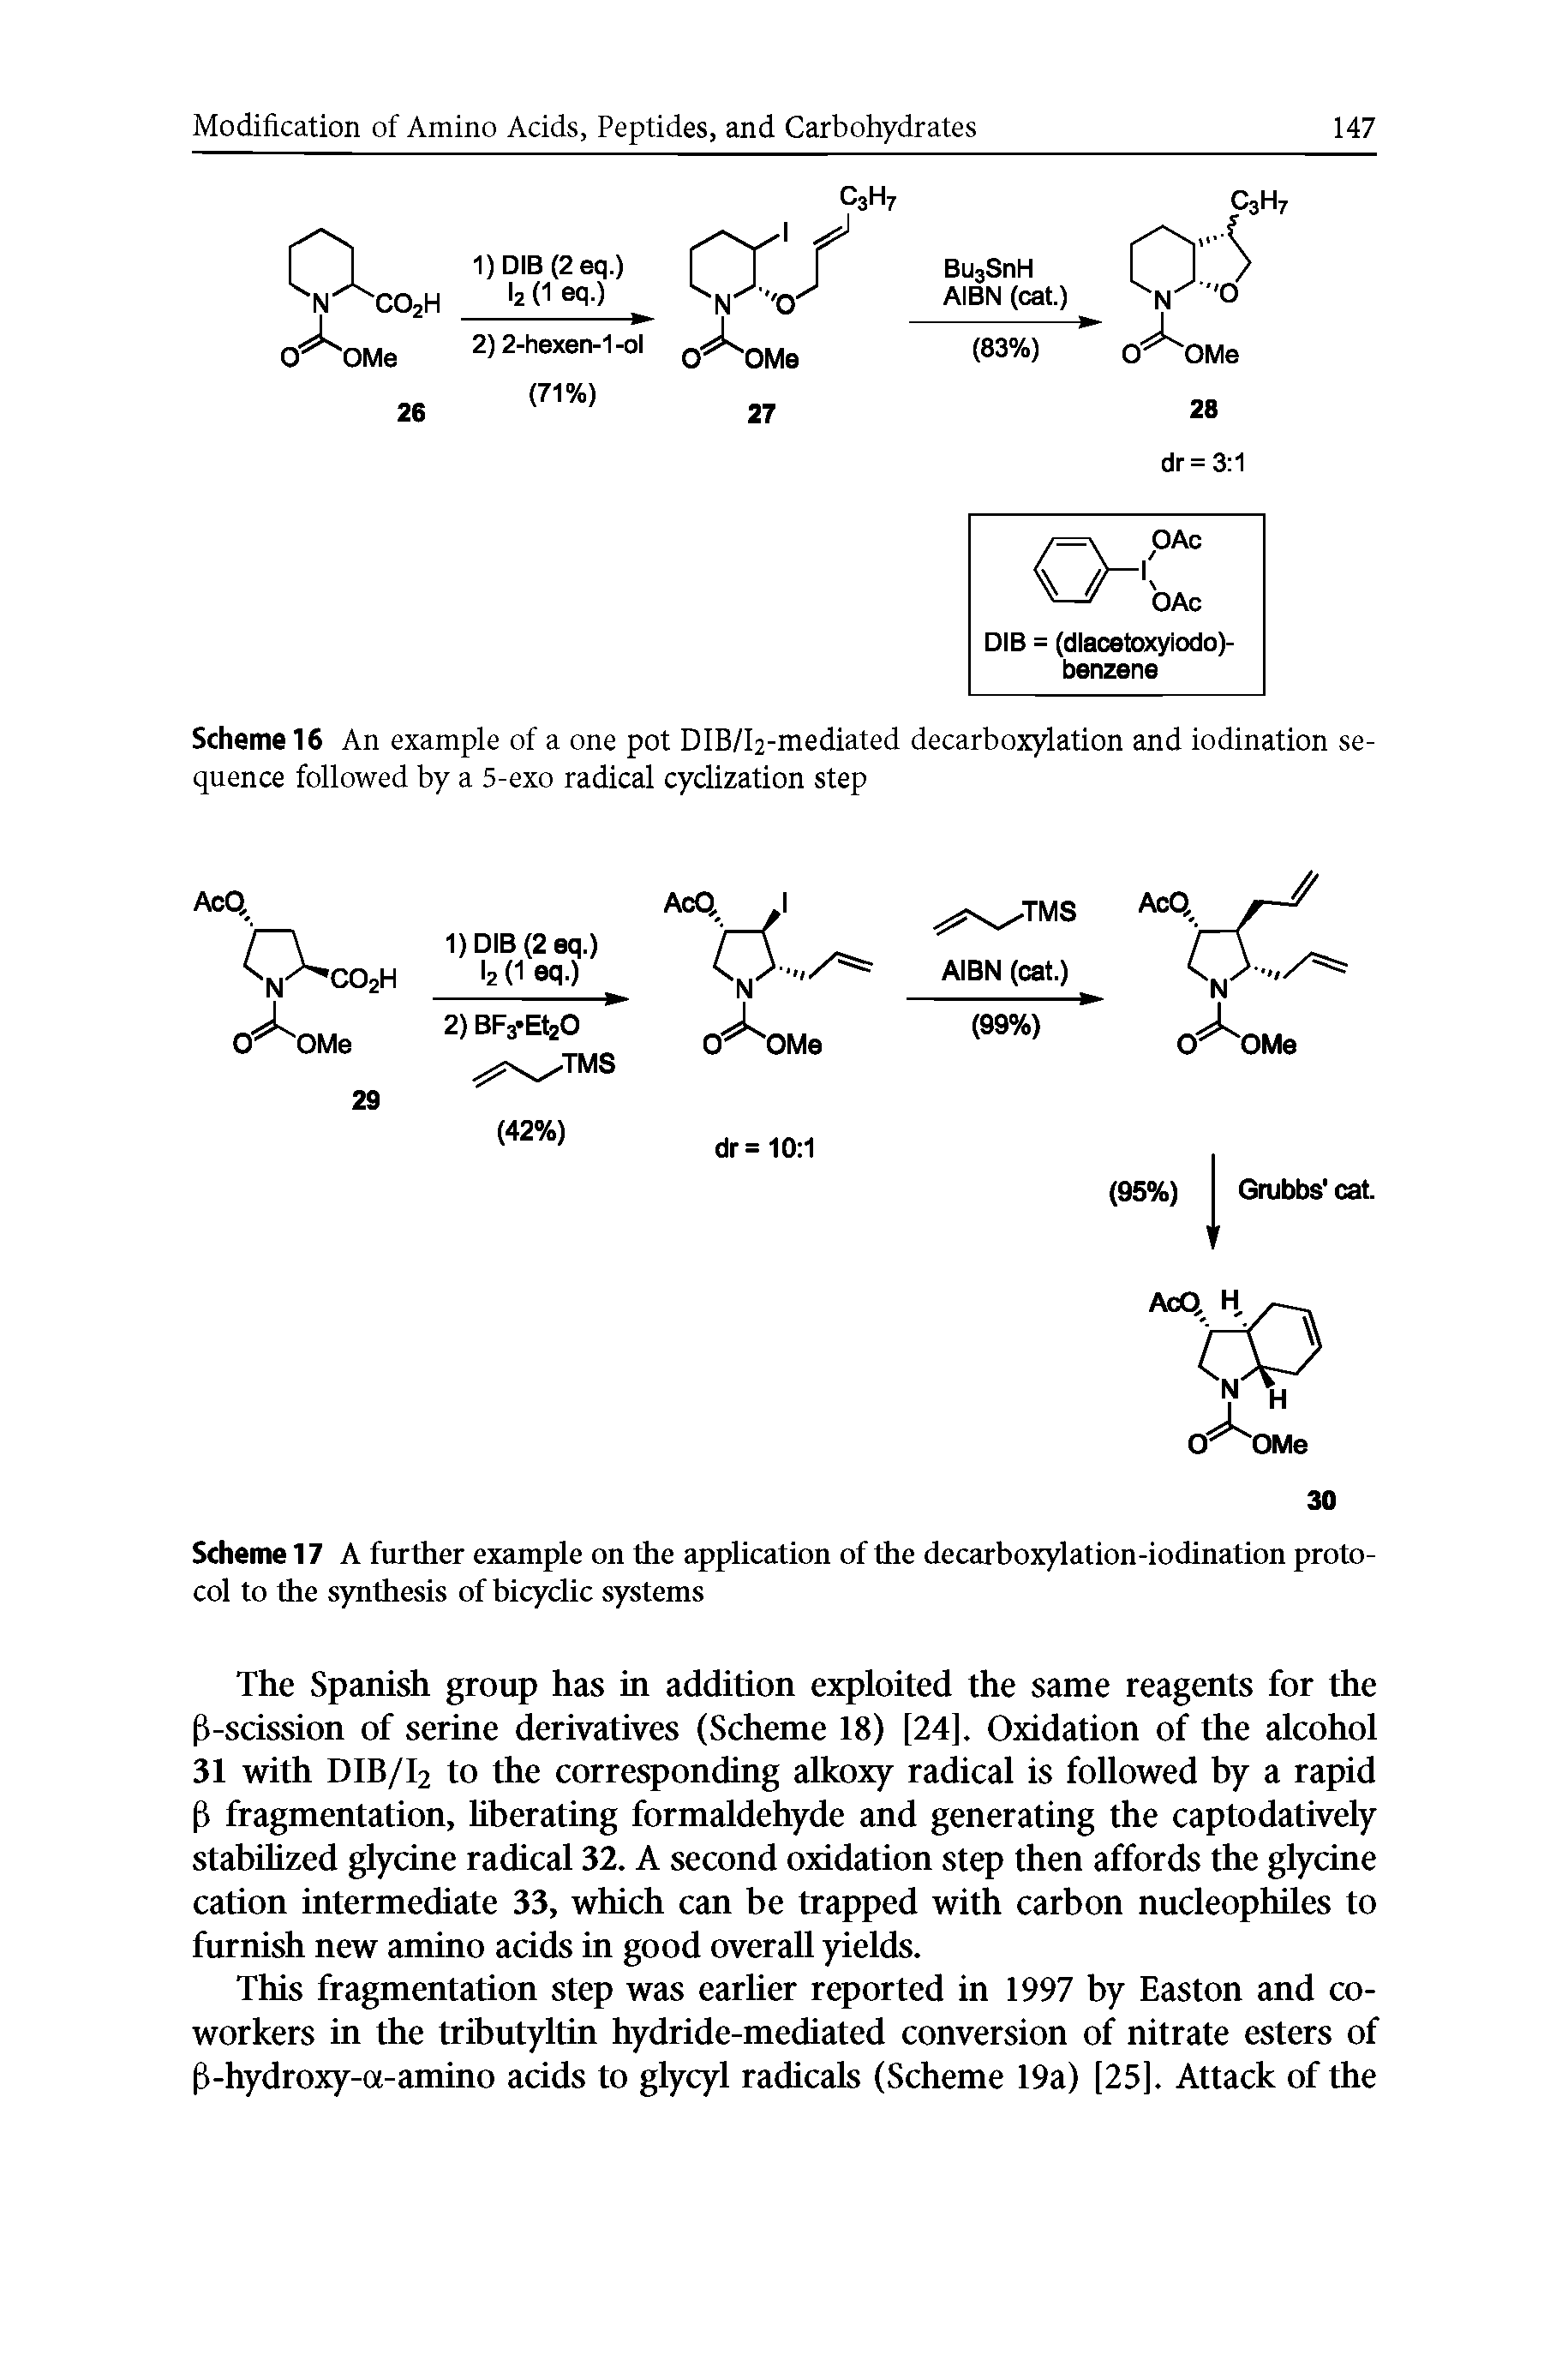 Scheme 17 A further example on the application of the decarboxylation-iodination protocol to the synthesis of bicyclic systems...